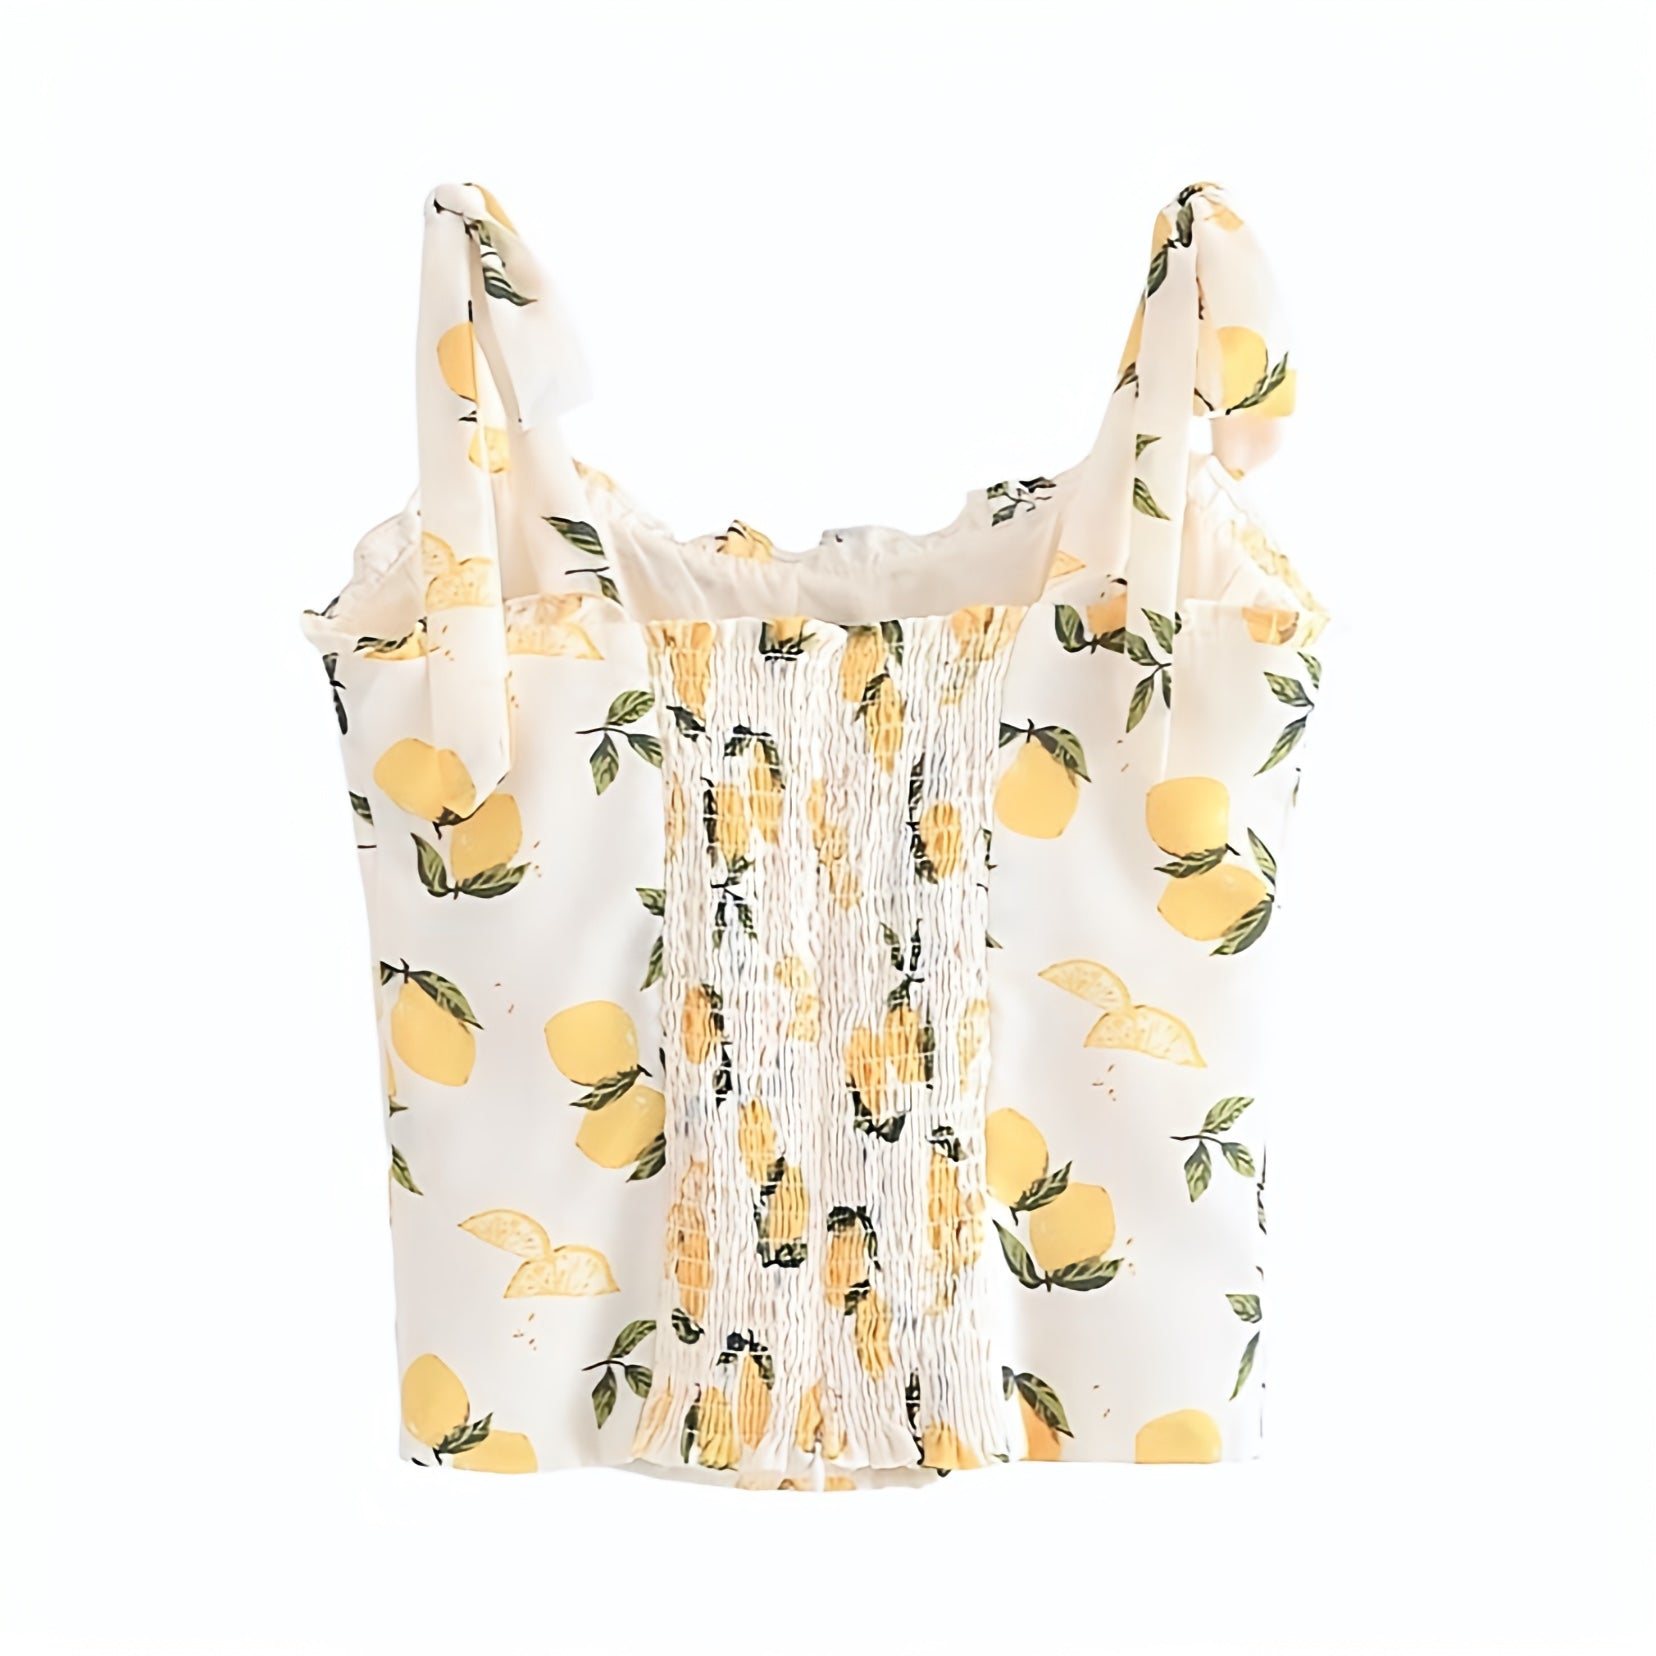 lemon-print-patterned-white-yellow-green-multi-color-slim-fit-bodycon-corset-bustier-ruffle-trim-sweetheart-neckline-spaghetti-strap-sleeveles-backless-open-back-crop-camisole-tank-top-blouse-shirt-women-ladies-teens-tweens-chic-trendy-spring-2024-summer-elgeant-casual-feminine-preppy-style-beach-wear-european-vacation-tops-altard-state-zara-aritzia-revolve-princess-polly-urban-outfitters-dupe